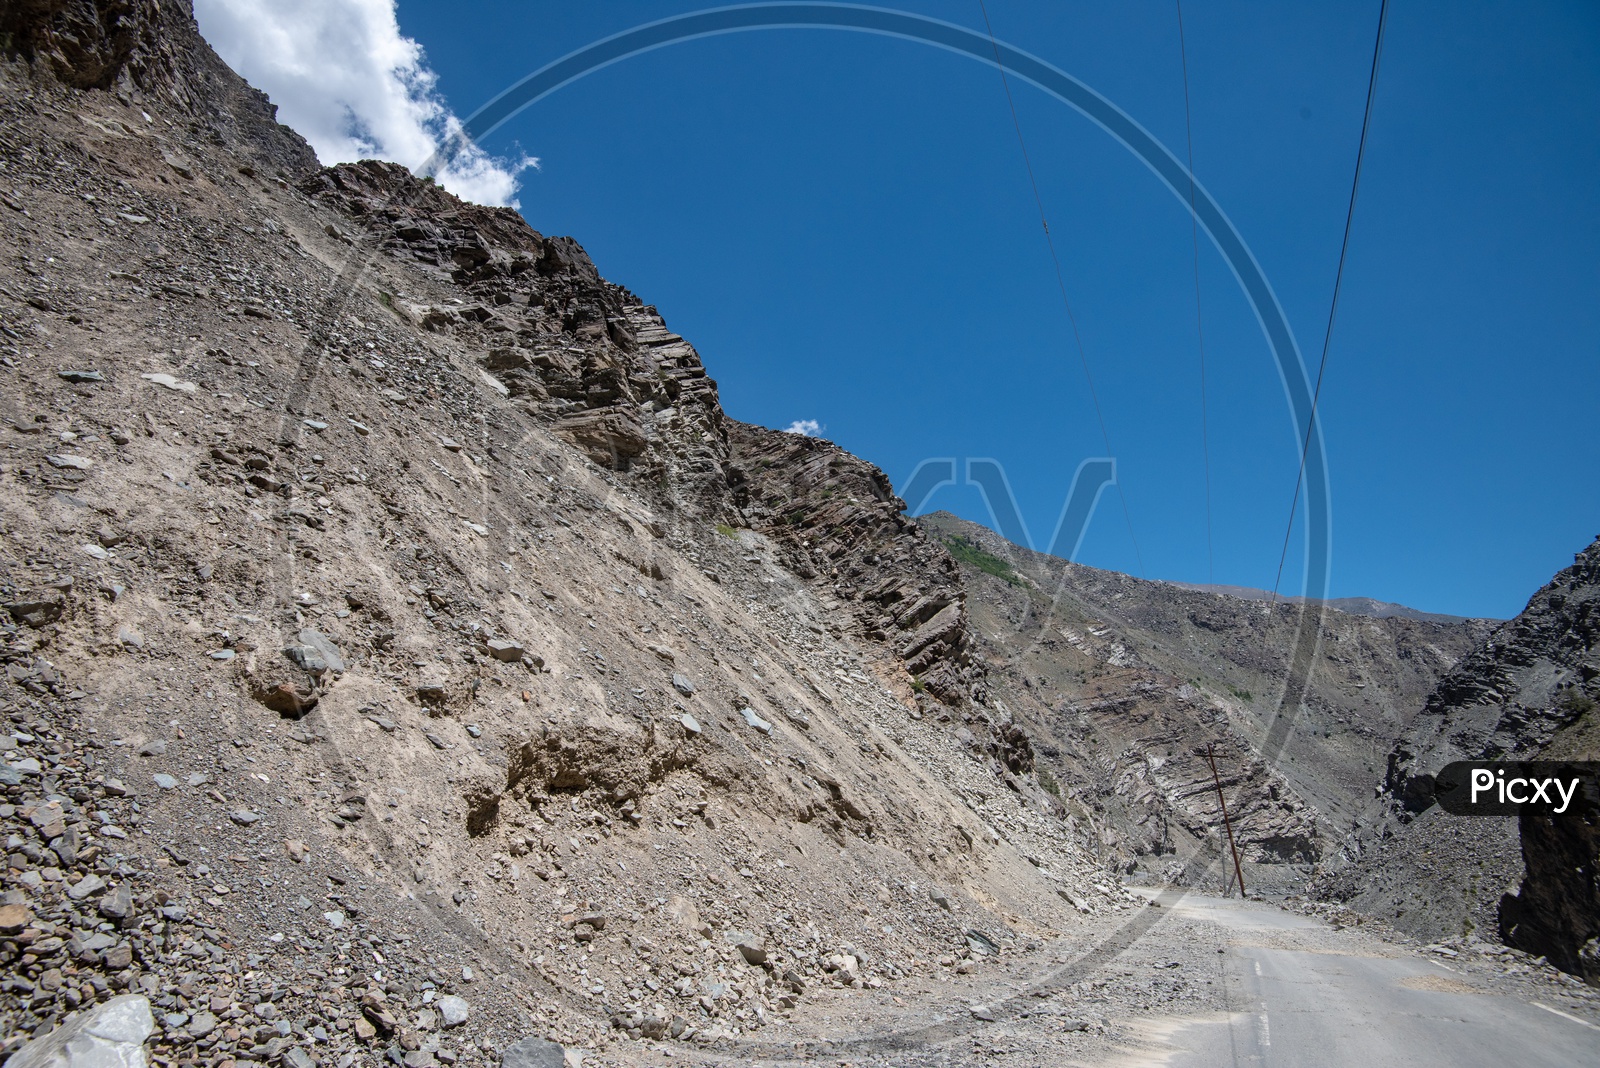 Roadways of Spiti Valley with mountains